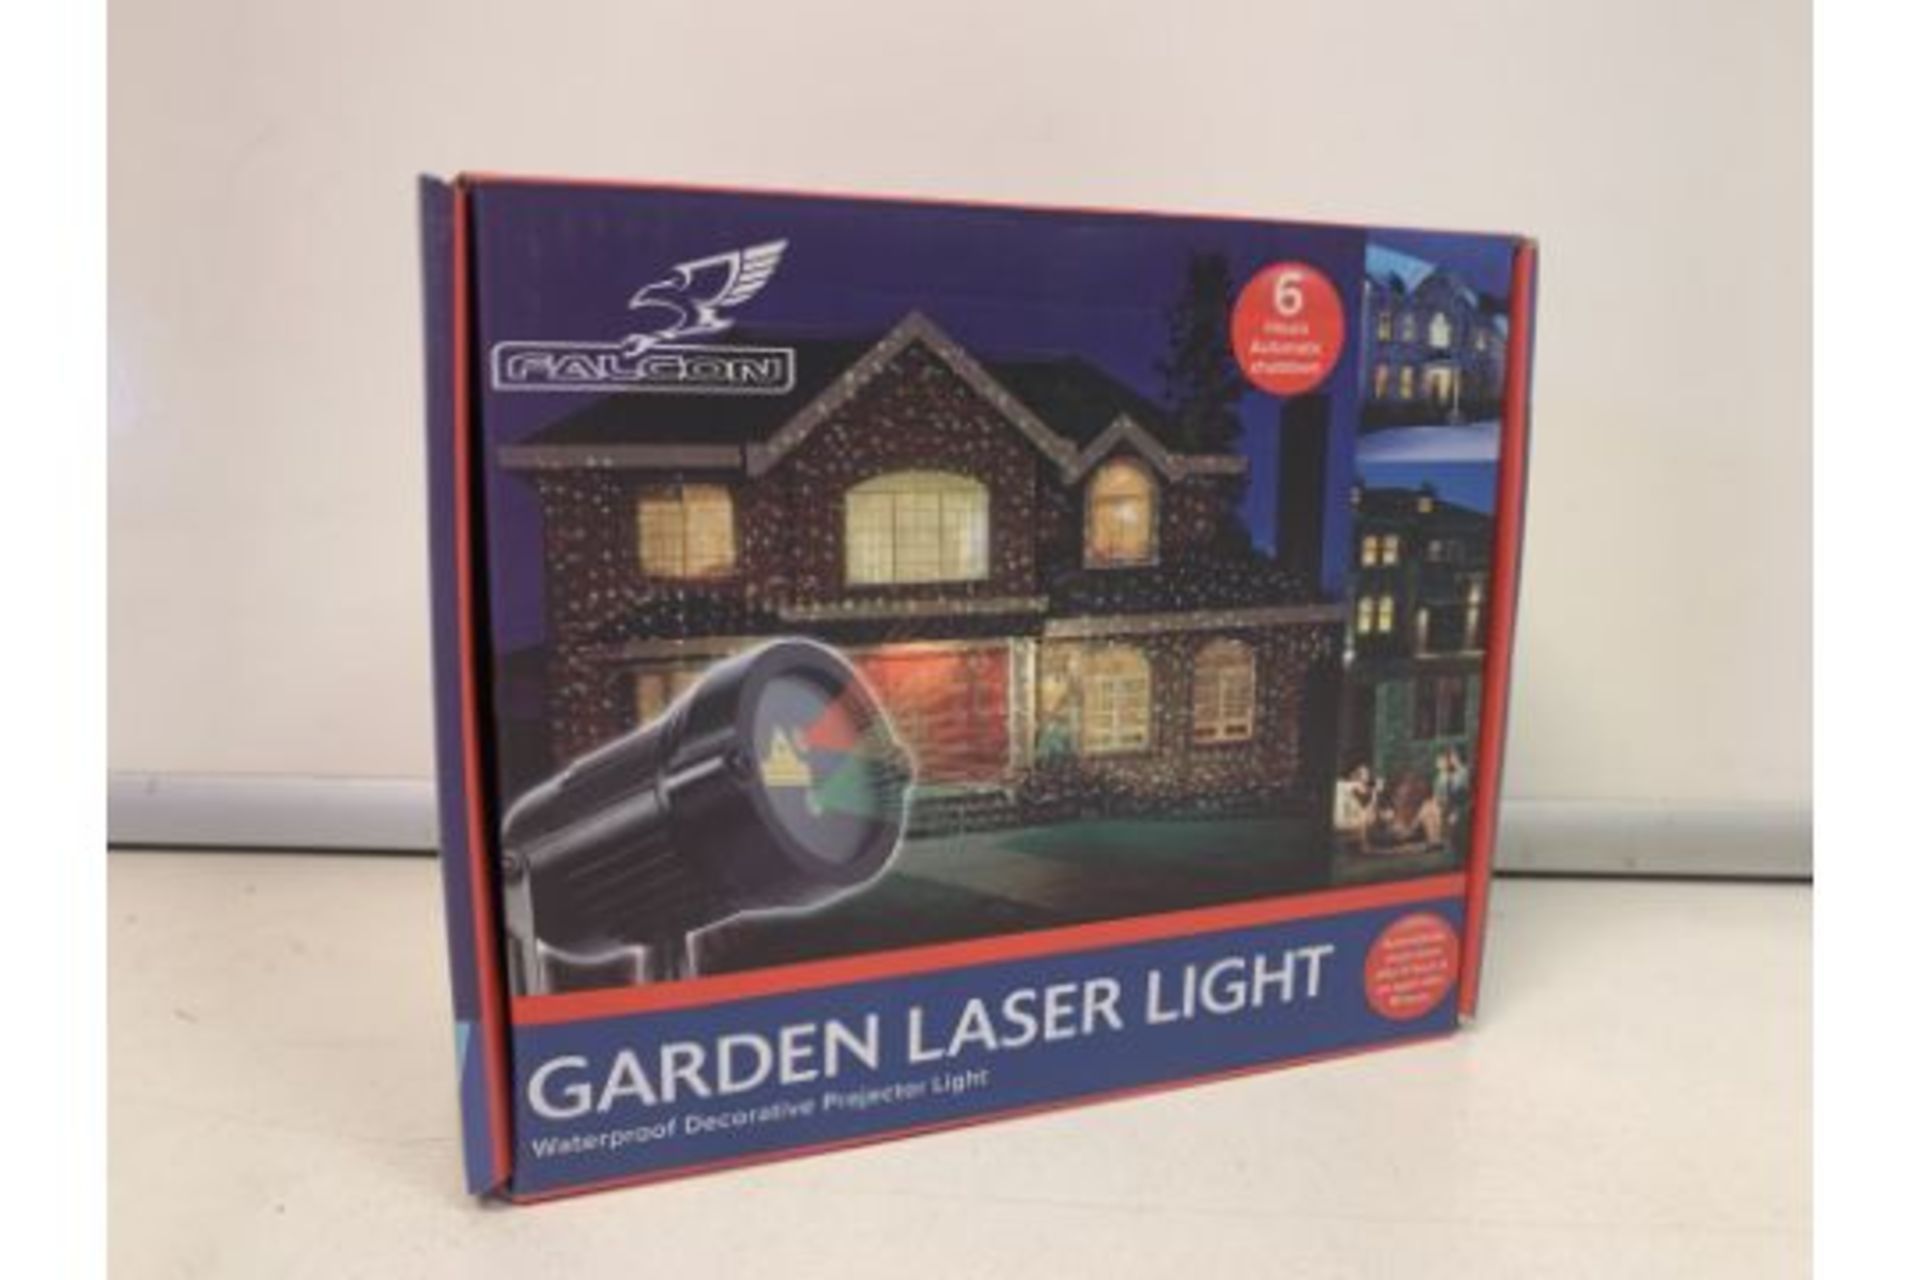 PALLET TO CONTAIN 48 X BRAND NEW BOXED FALCON GARDEN LASER LIGHTS - WATERPROOF DECORATIVE